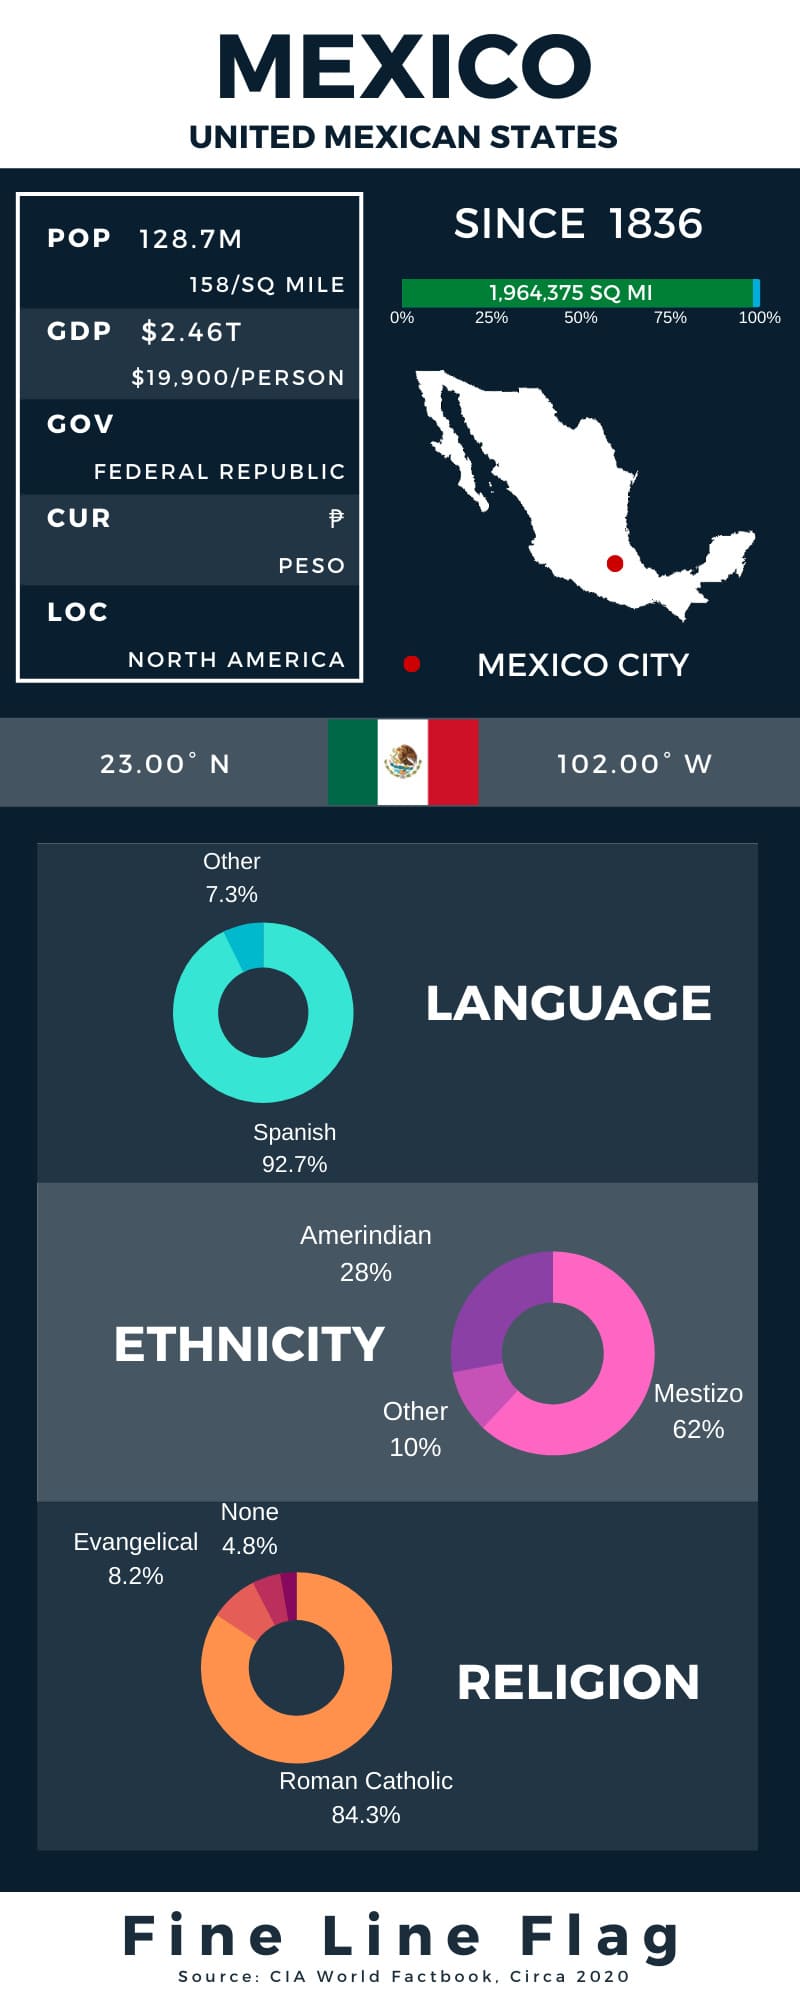 Mexico Country Facts Infographic
